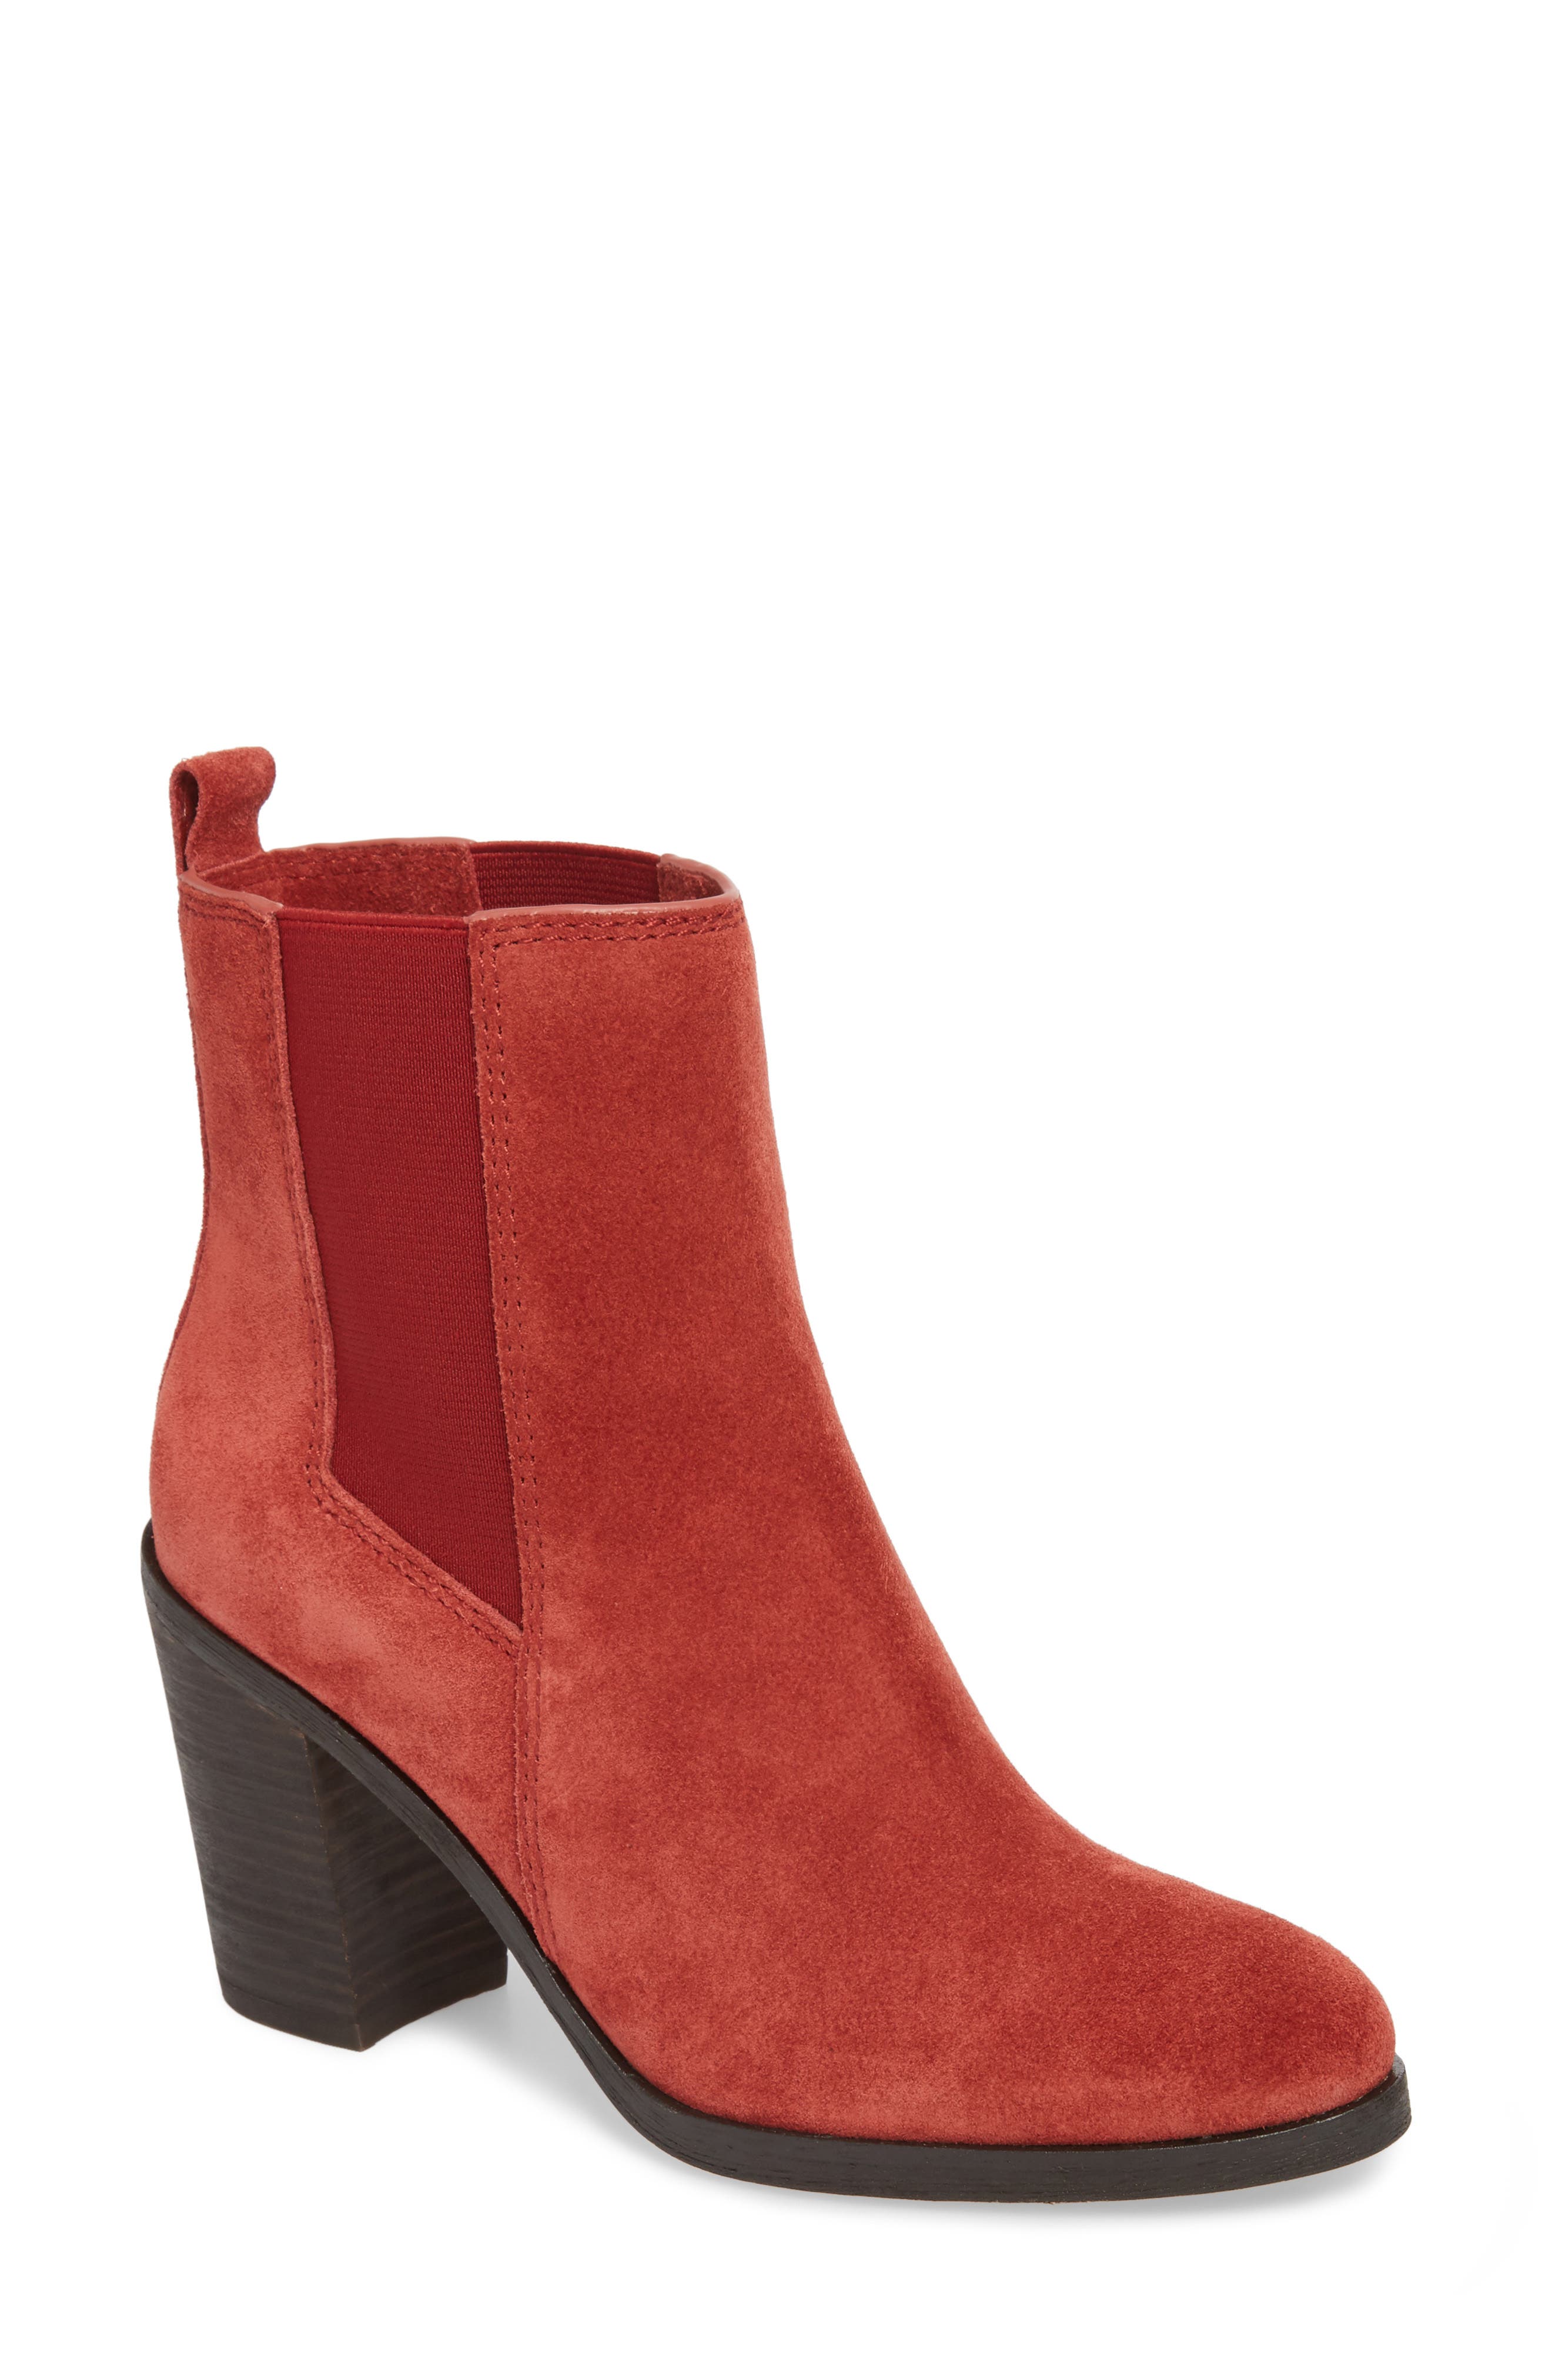 Ankle Boots \u0026 Booties | Nordstrom